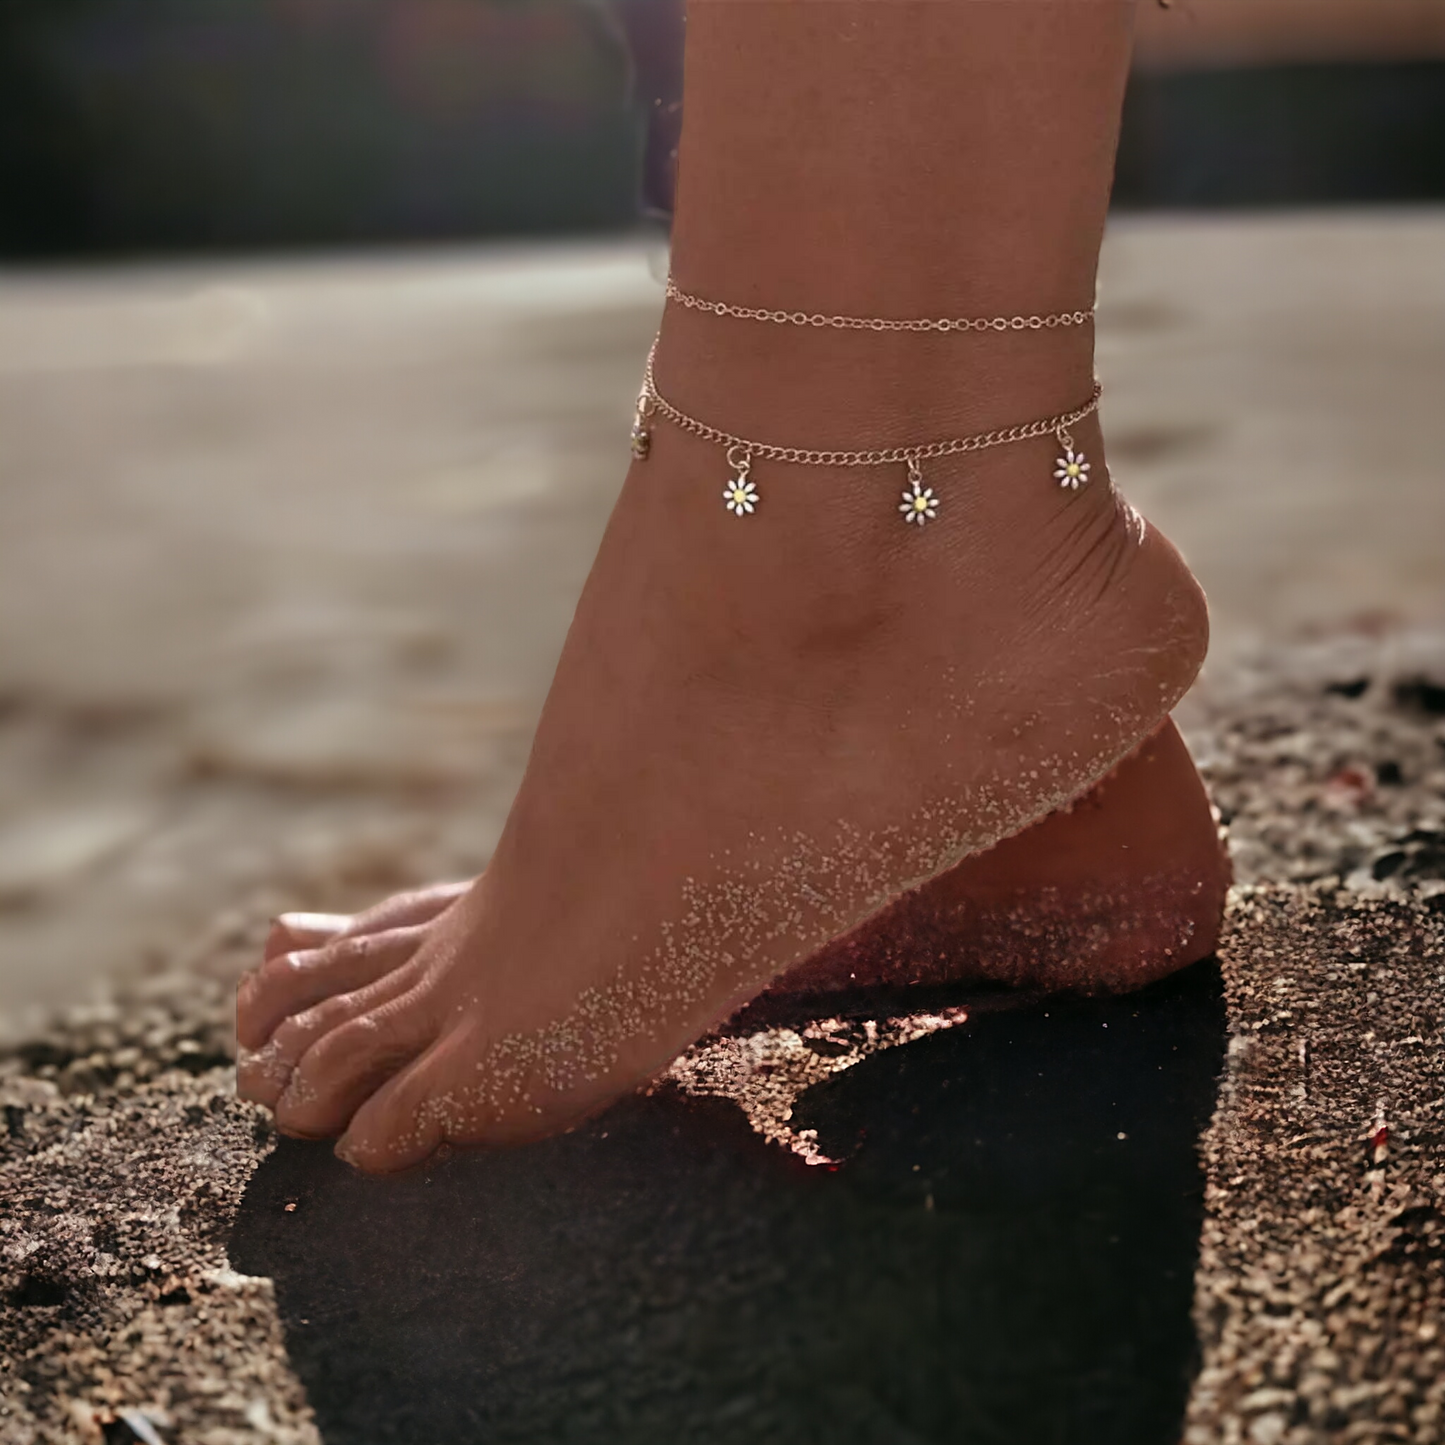 Sunshine and daisy anklet